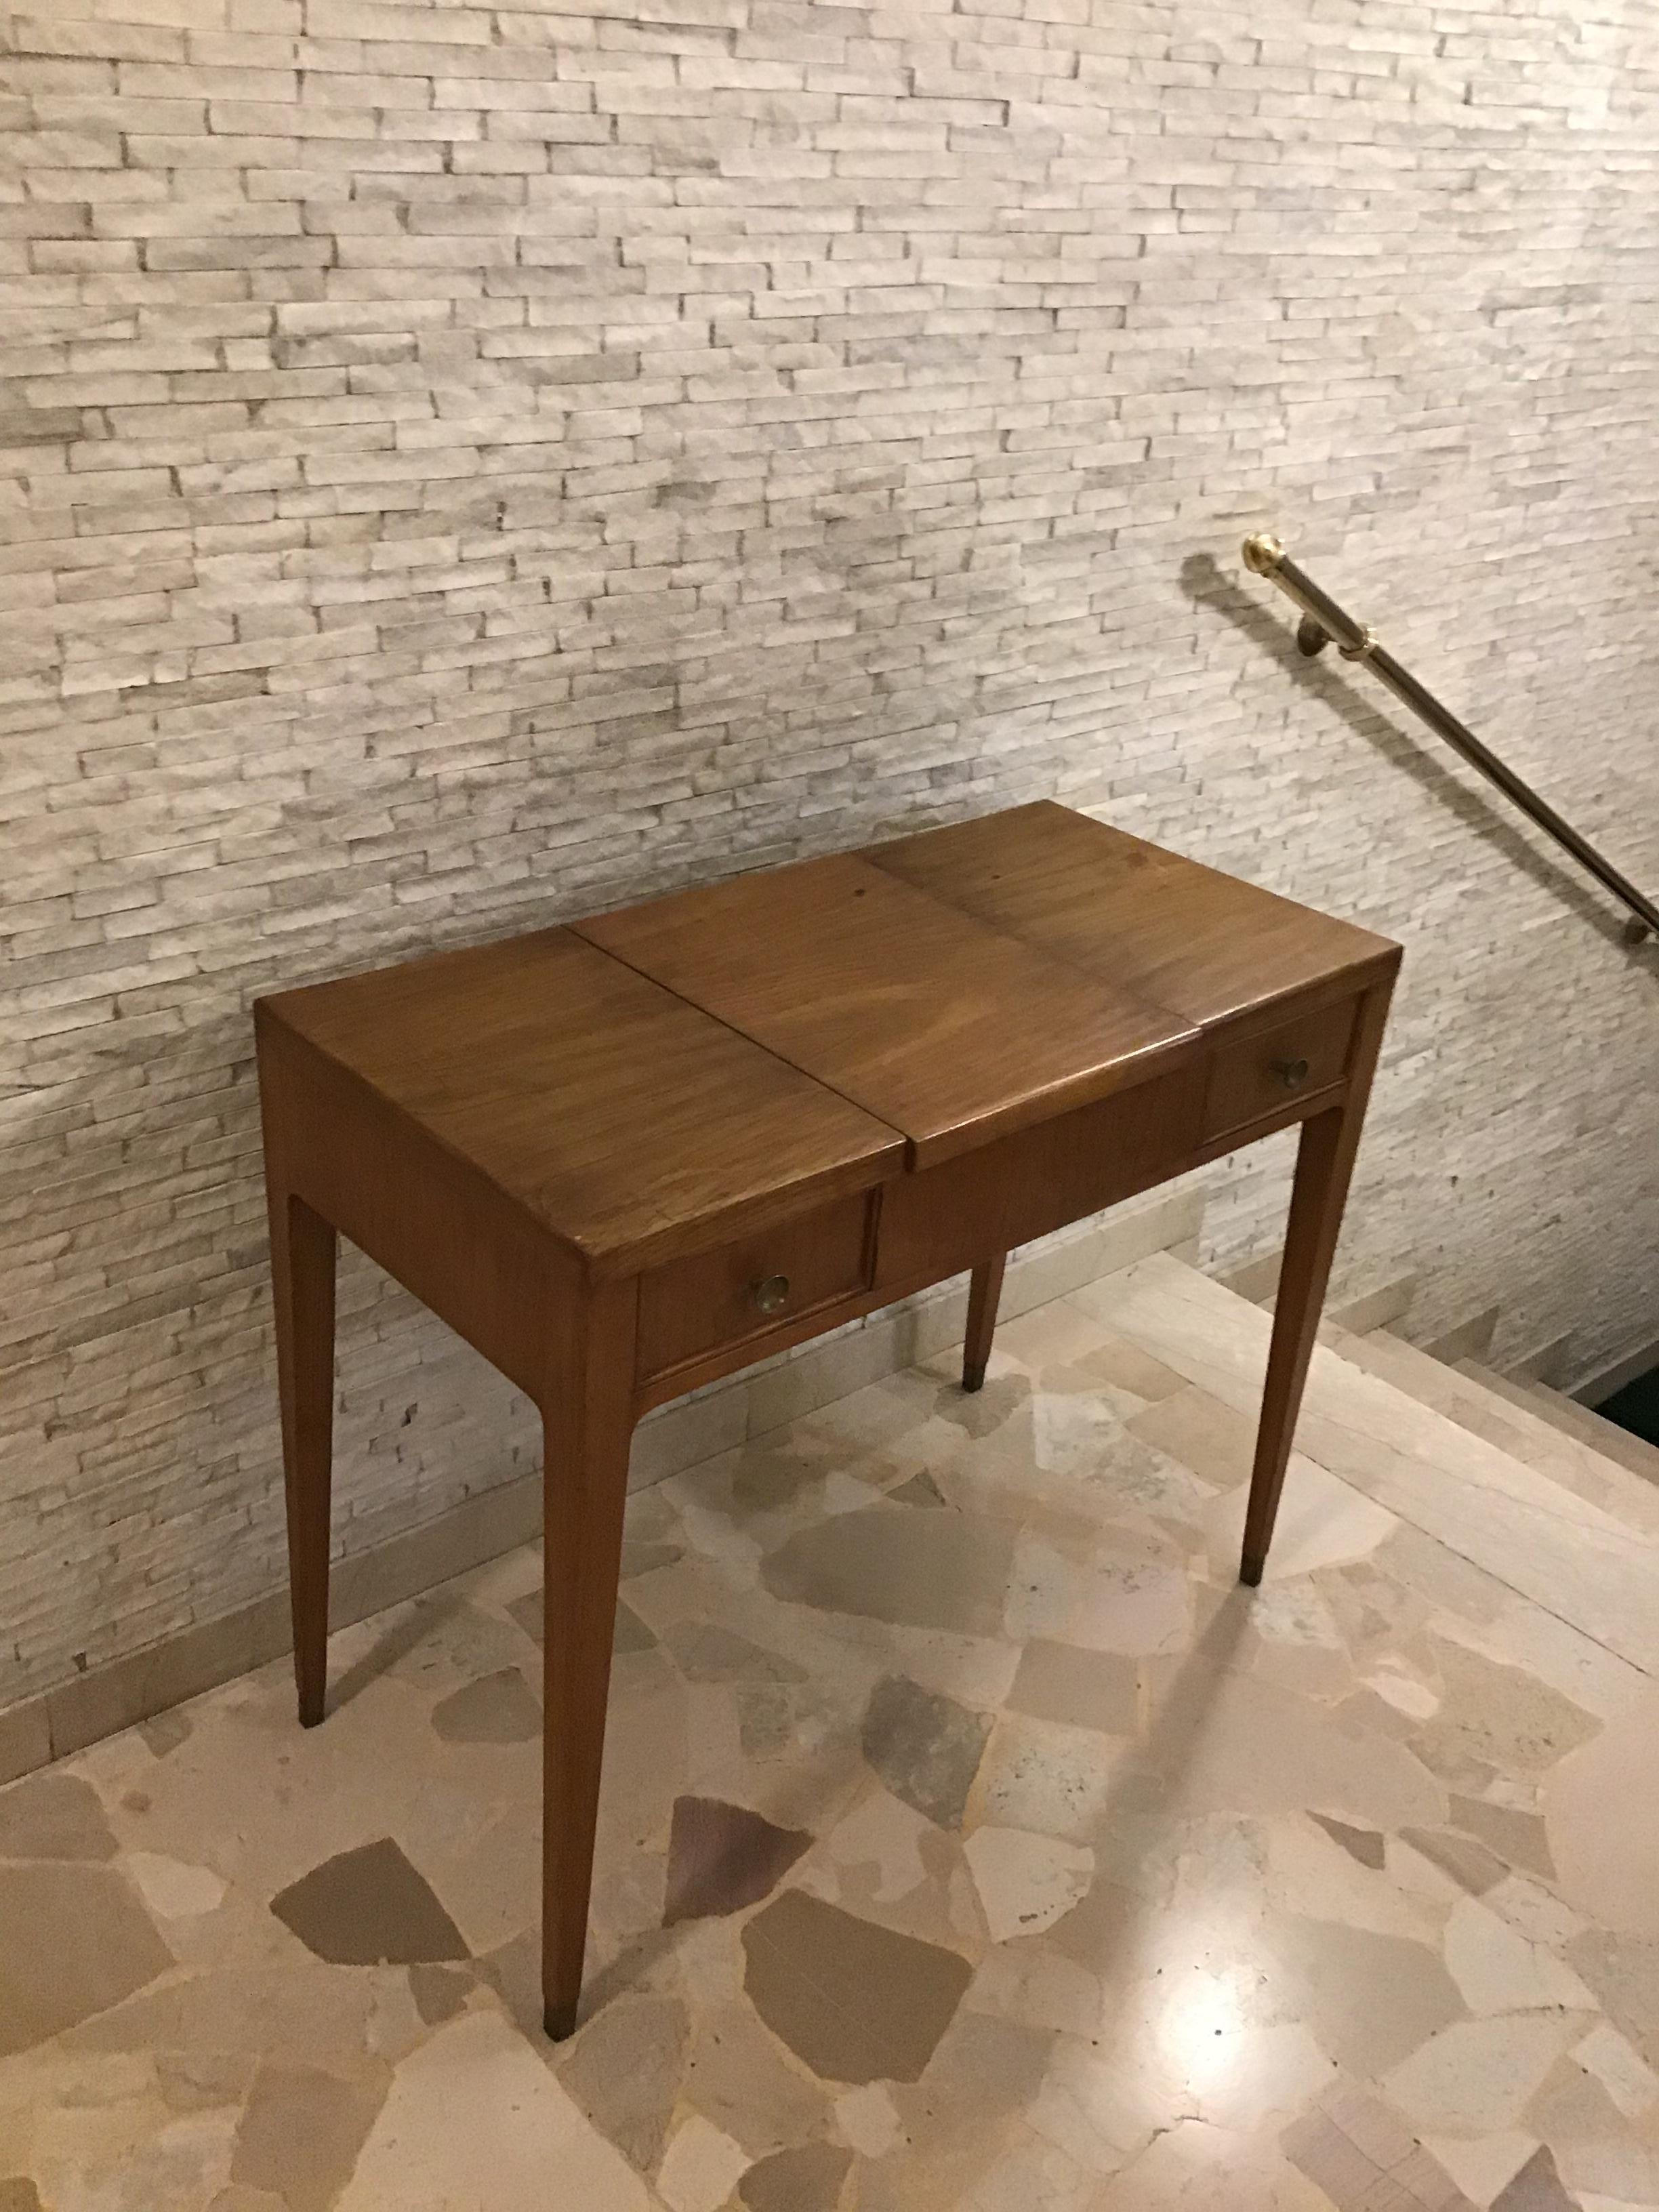 Mid-20th Century Gio’ Ponti “Style” Toilet /Desk Wood Brass, 1950, Italy For Sale